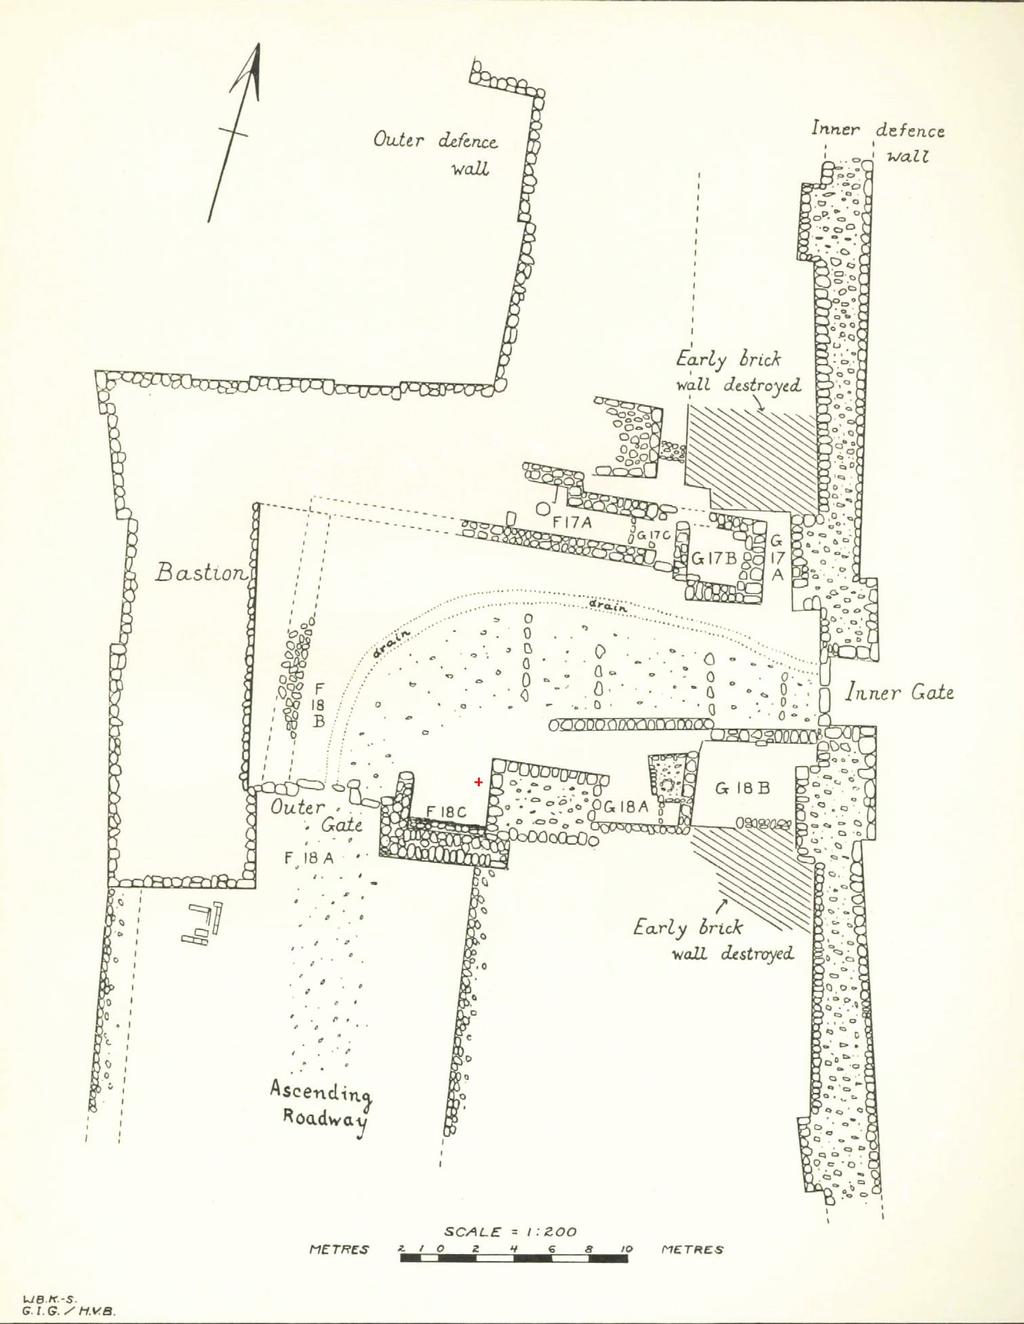 Plan of Bastion and Gateways, from Lachish I: The Lachish Letters (1938), 223. The red + indicates the location of Room F18C. on Jerusalem.